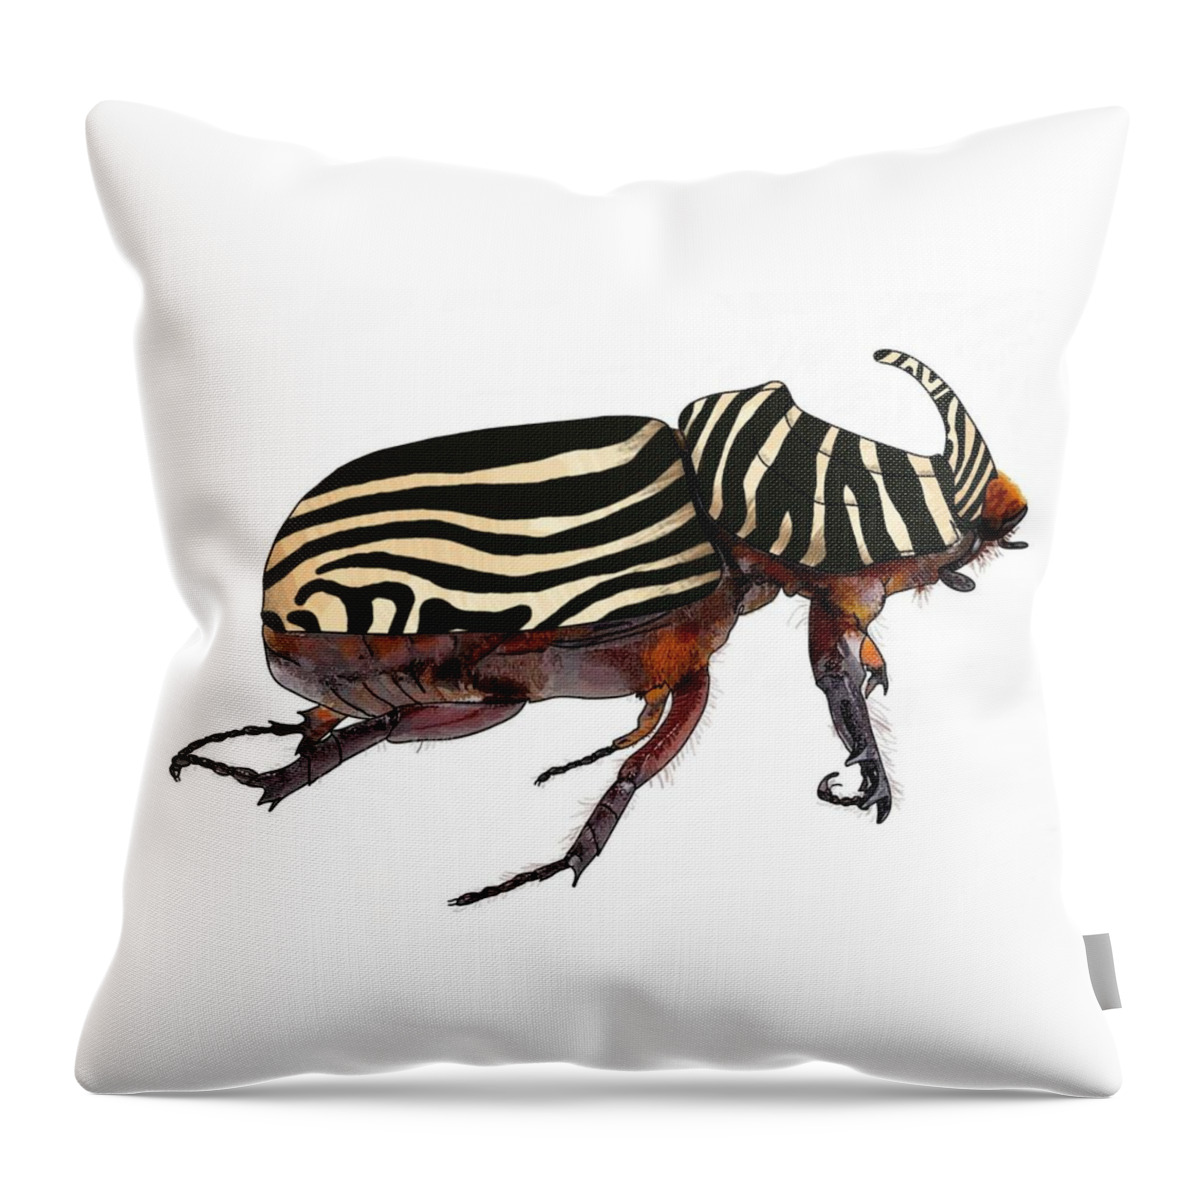 Rhinoceros Beetle Throw Pillow featuring the drawing Zebra Striped Rhinoceros Beetle On White by Joan Stratton